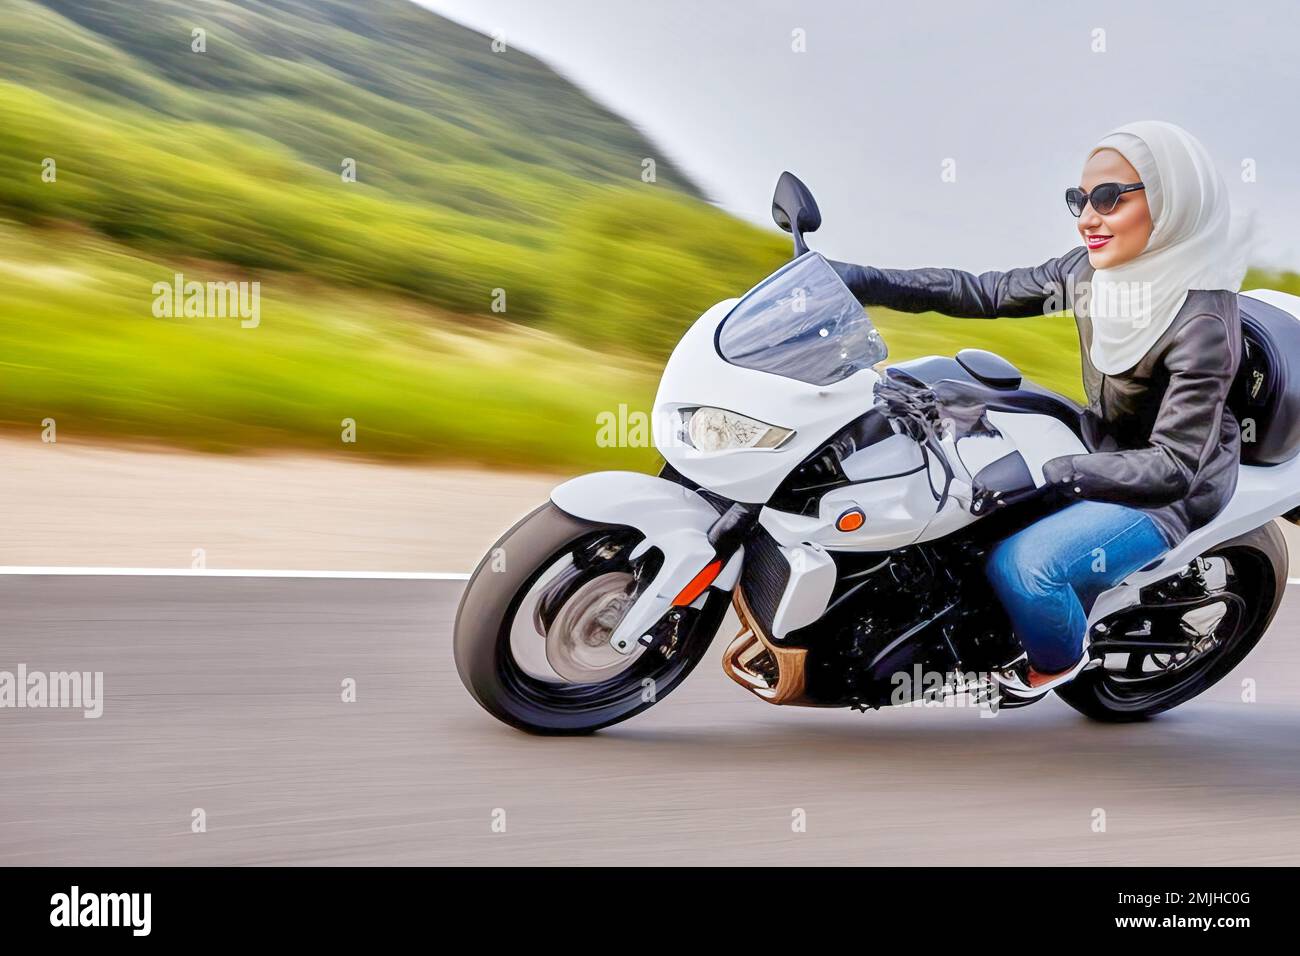 Young woman wearing jeans, black leather jacket, white hijab and sunglasses cornering her motorbike, background with motion blur, fictional person, ma Stock Photo